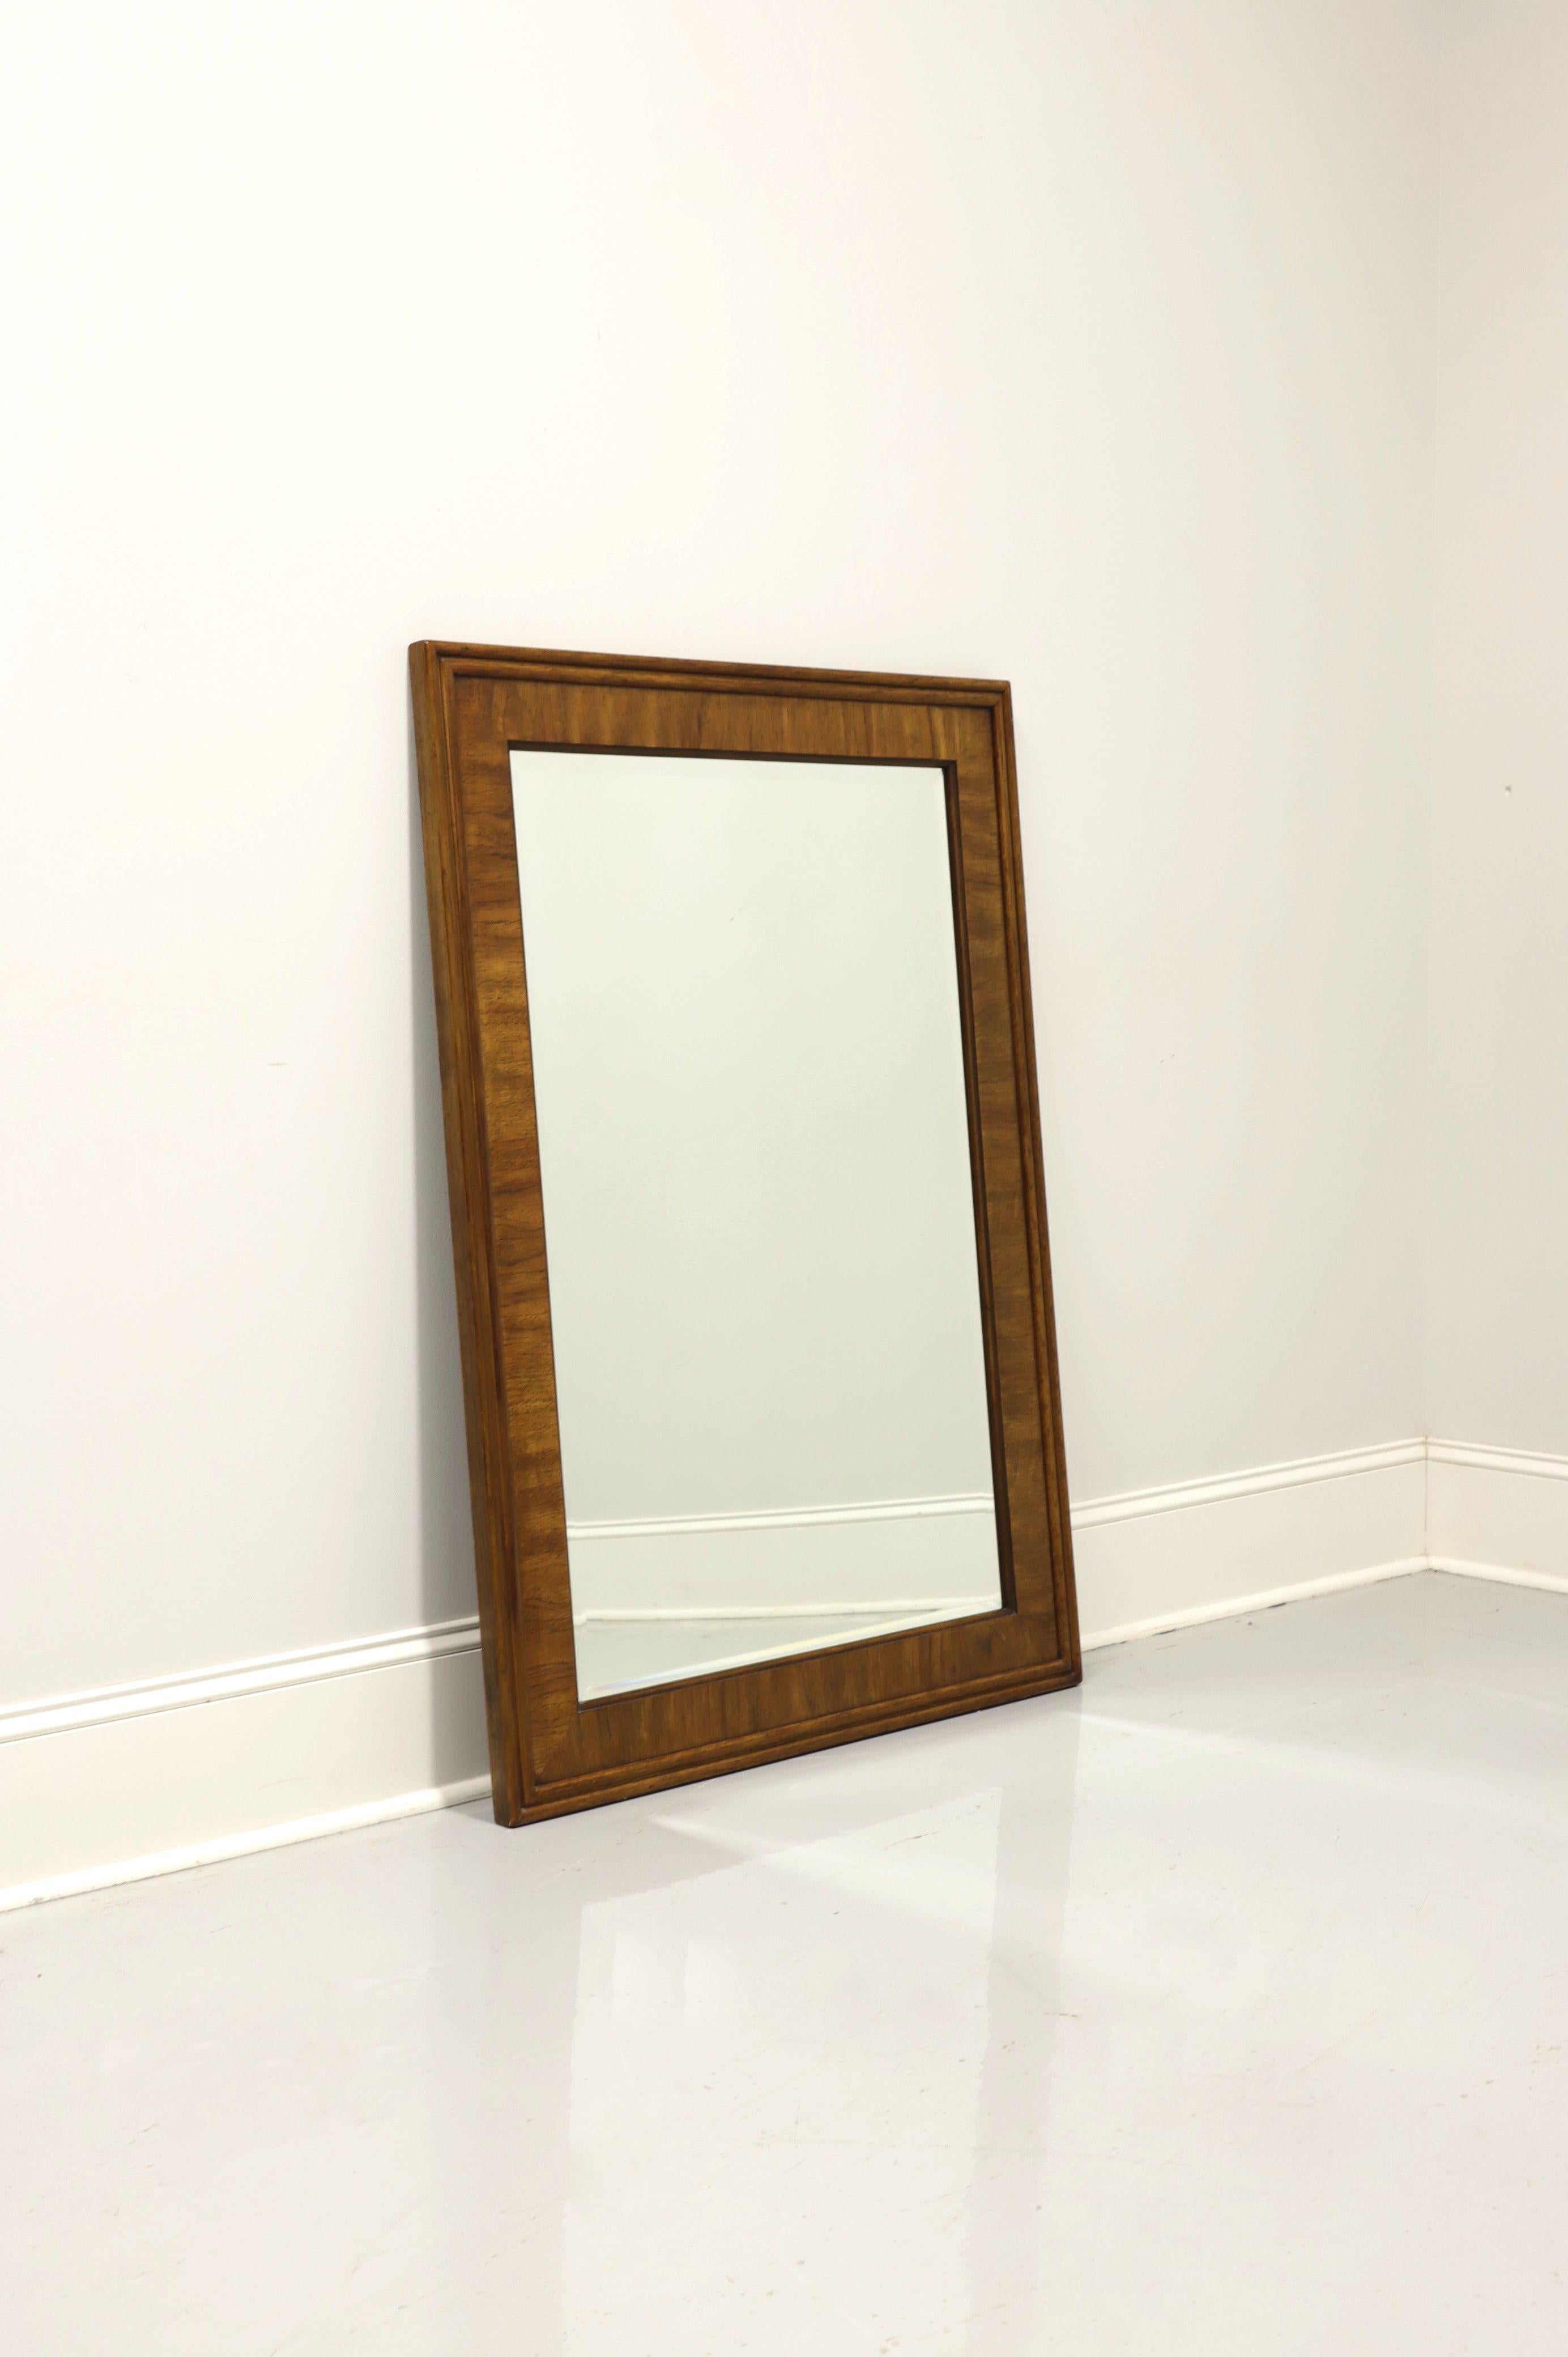 A Campaign style wall mirror by Drexel Heritage, from their Accolade collection. Beveled mirror glass and rectangular banded pecan frame. Made in North Carolina, USA, circa 1985. 

Style #: 904-212-2

Measures: 33.75 W 1.25 D 47.75 H, Weighs